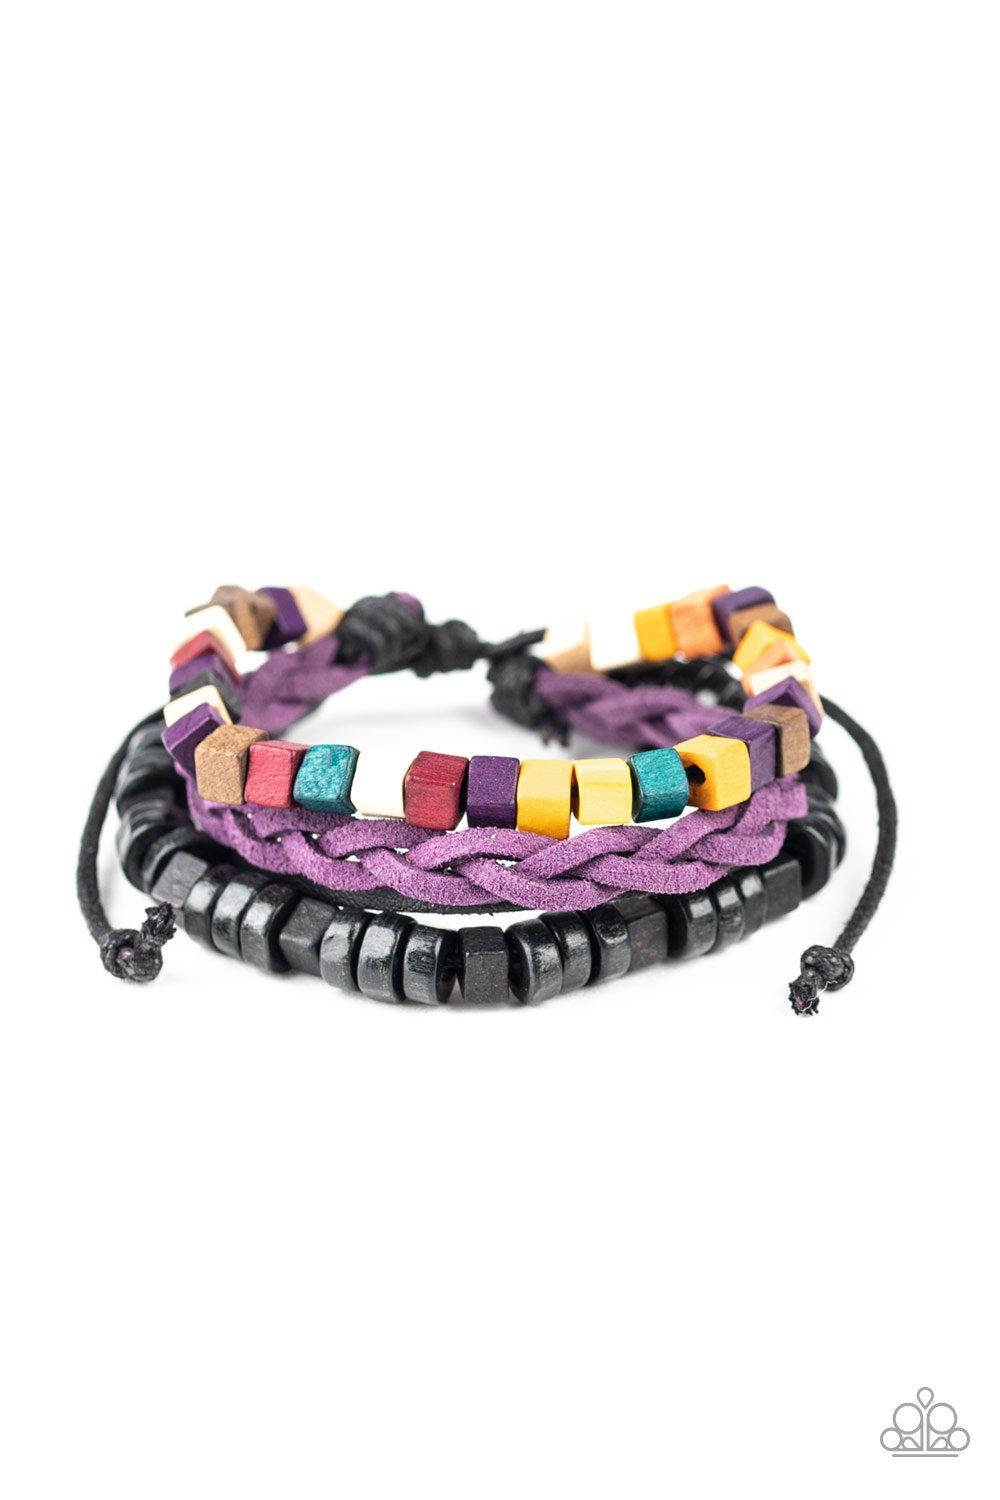 Technicolor Timberland Multi-color Wood and Suede Urban Knot Bracelet - Paparazzi Accessories - lightbox -CarasShop.com - $5 Jewelry by Cara Jewels